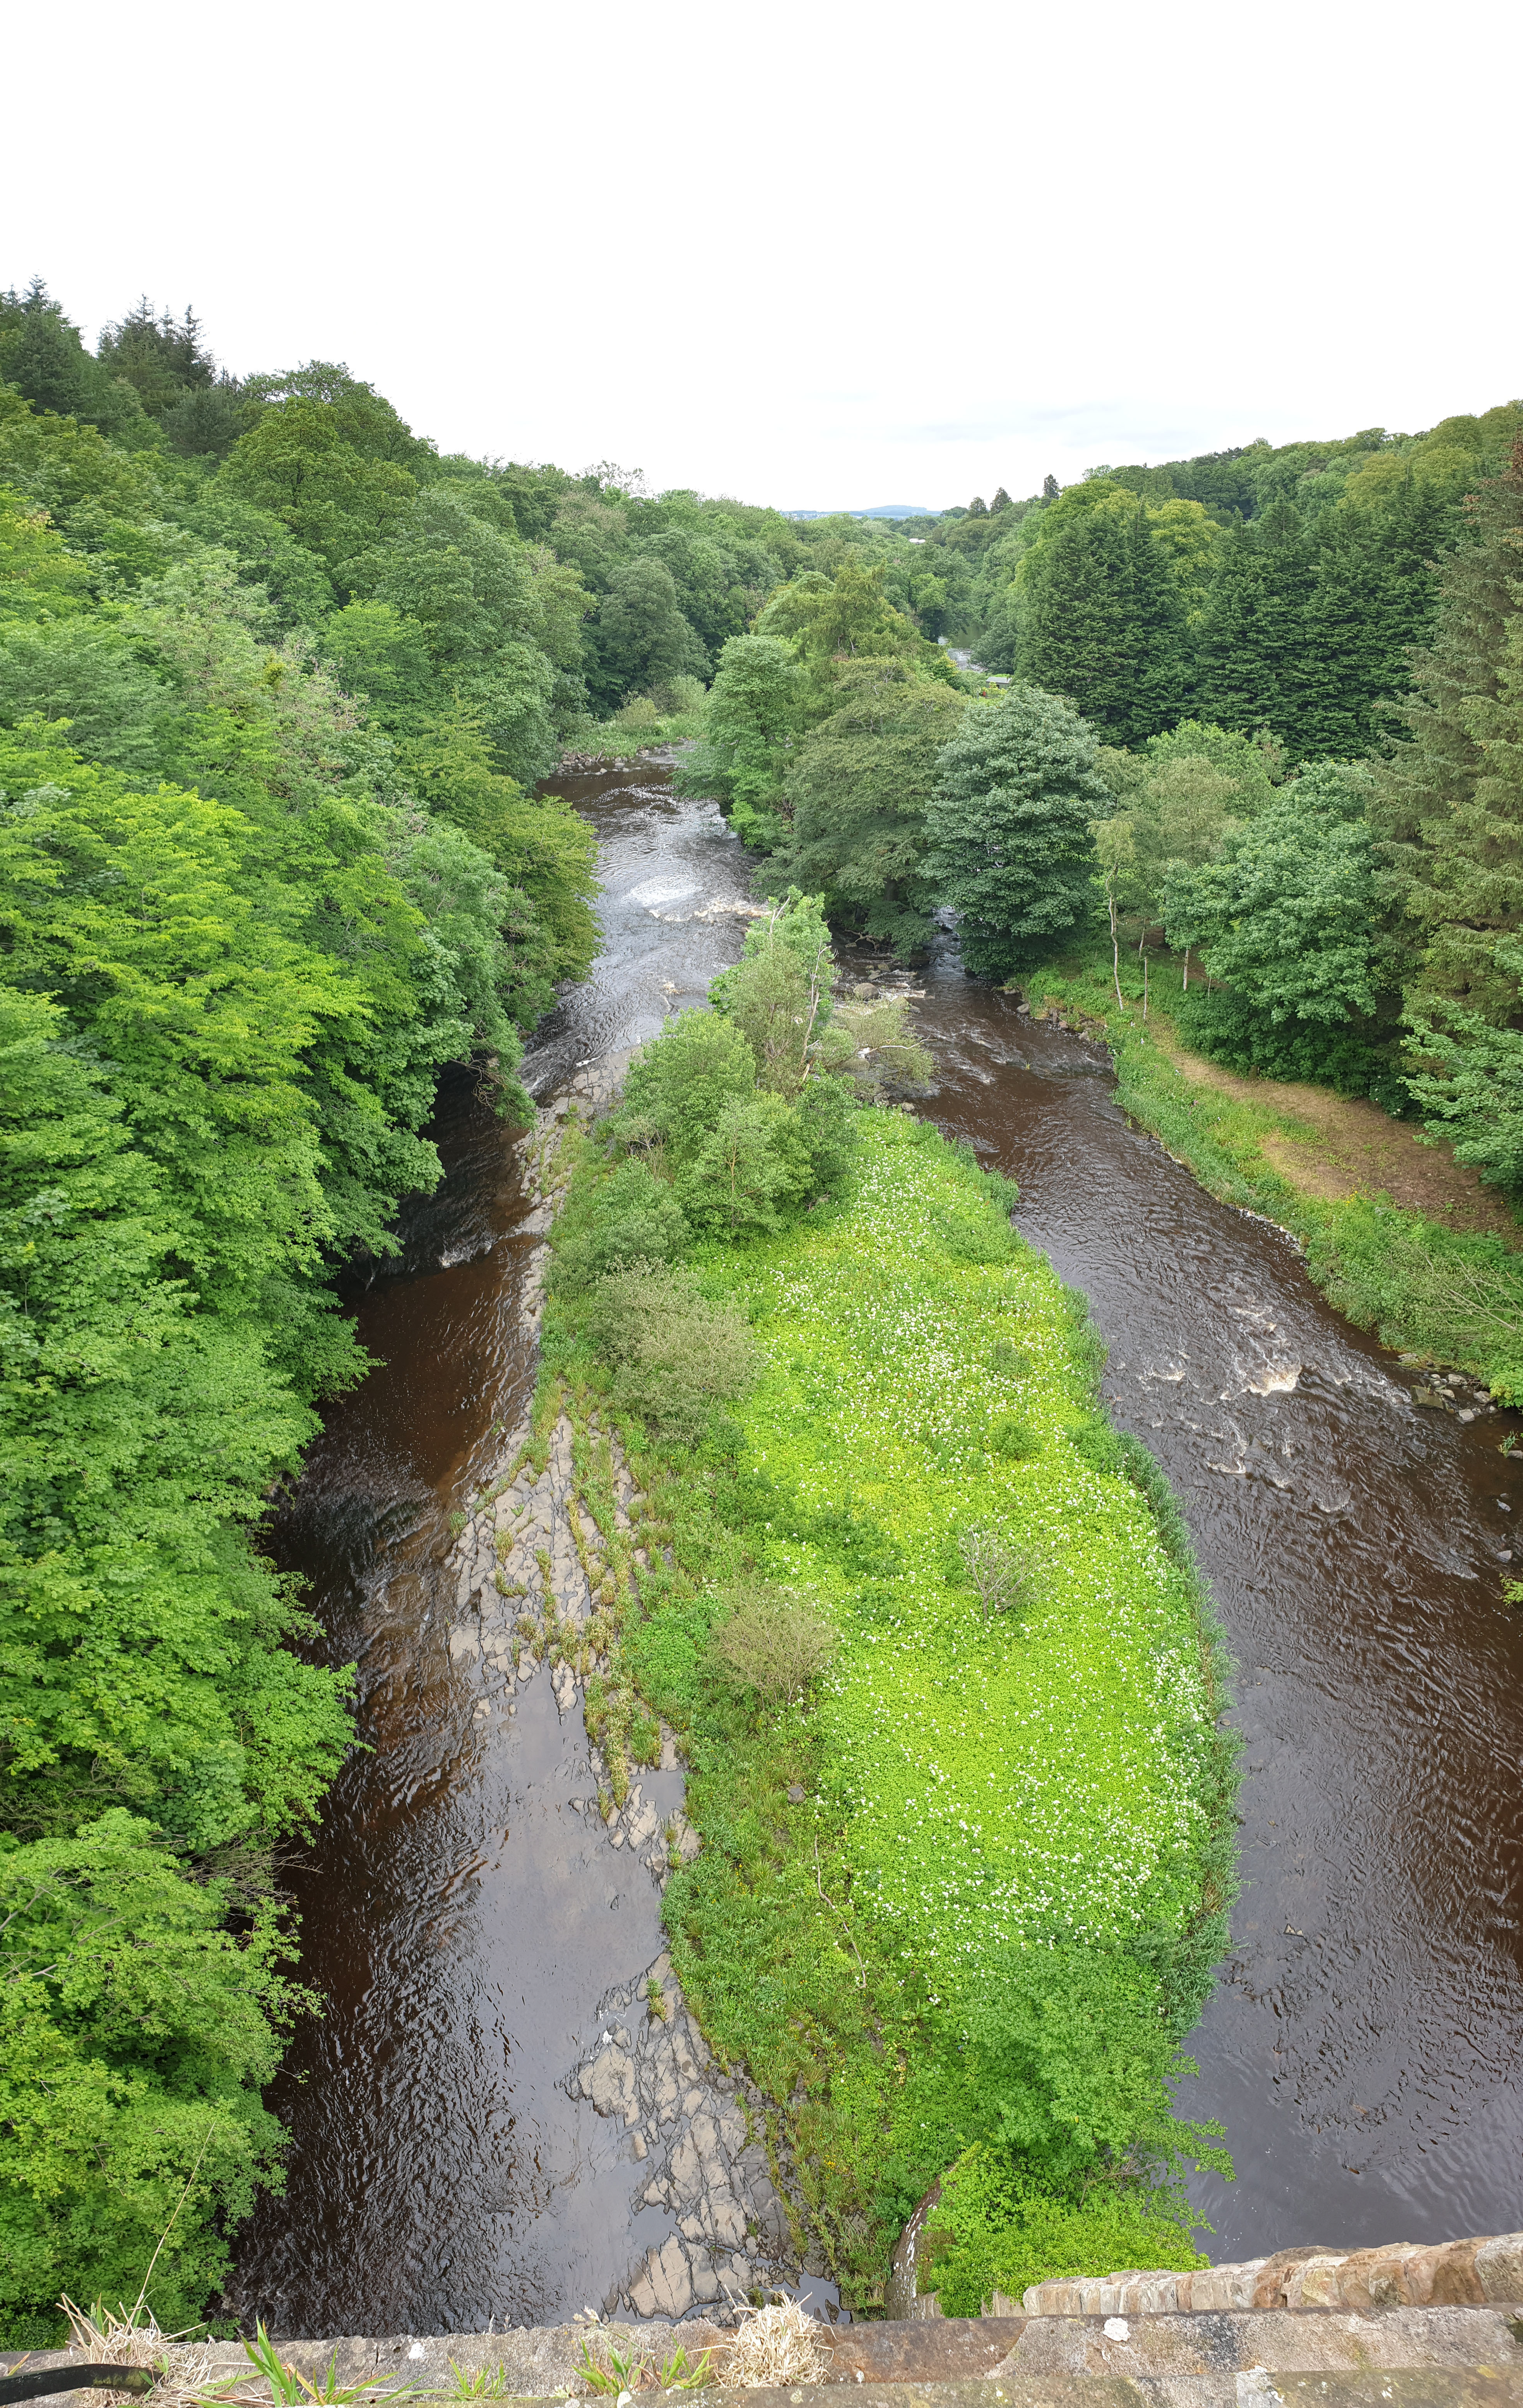 River Almond viewed from the Union Canal aqueduct that spans it (edited: removed aeroplane)